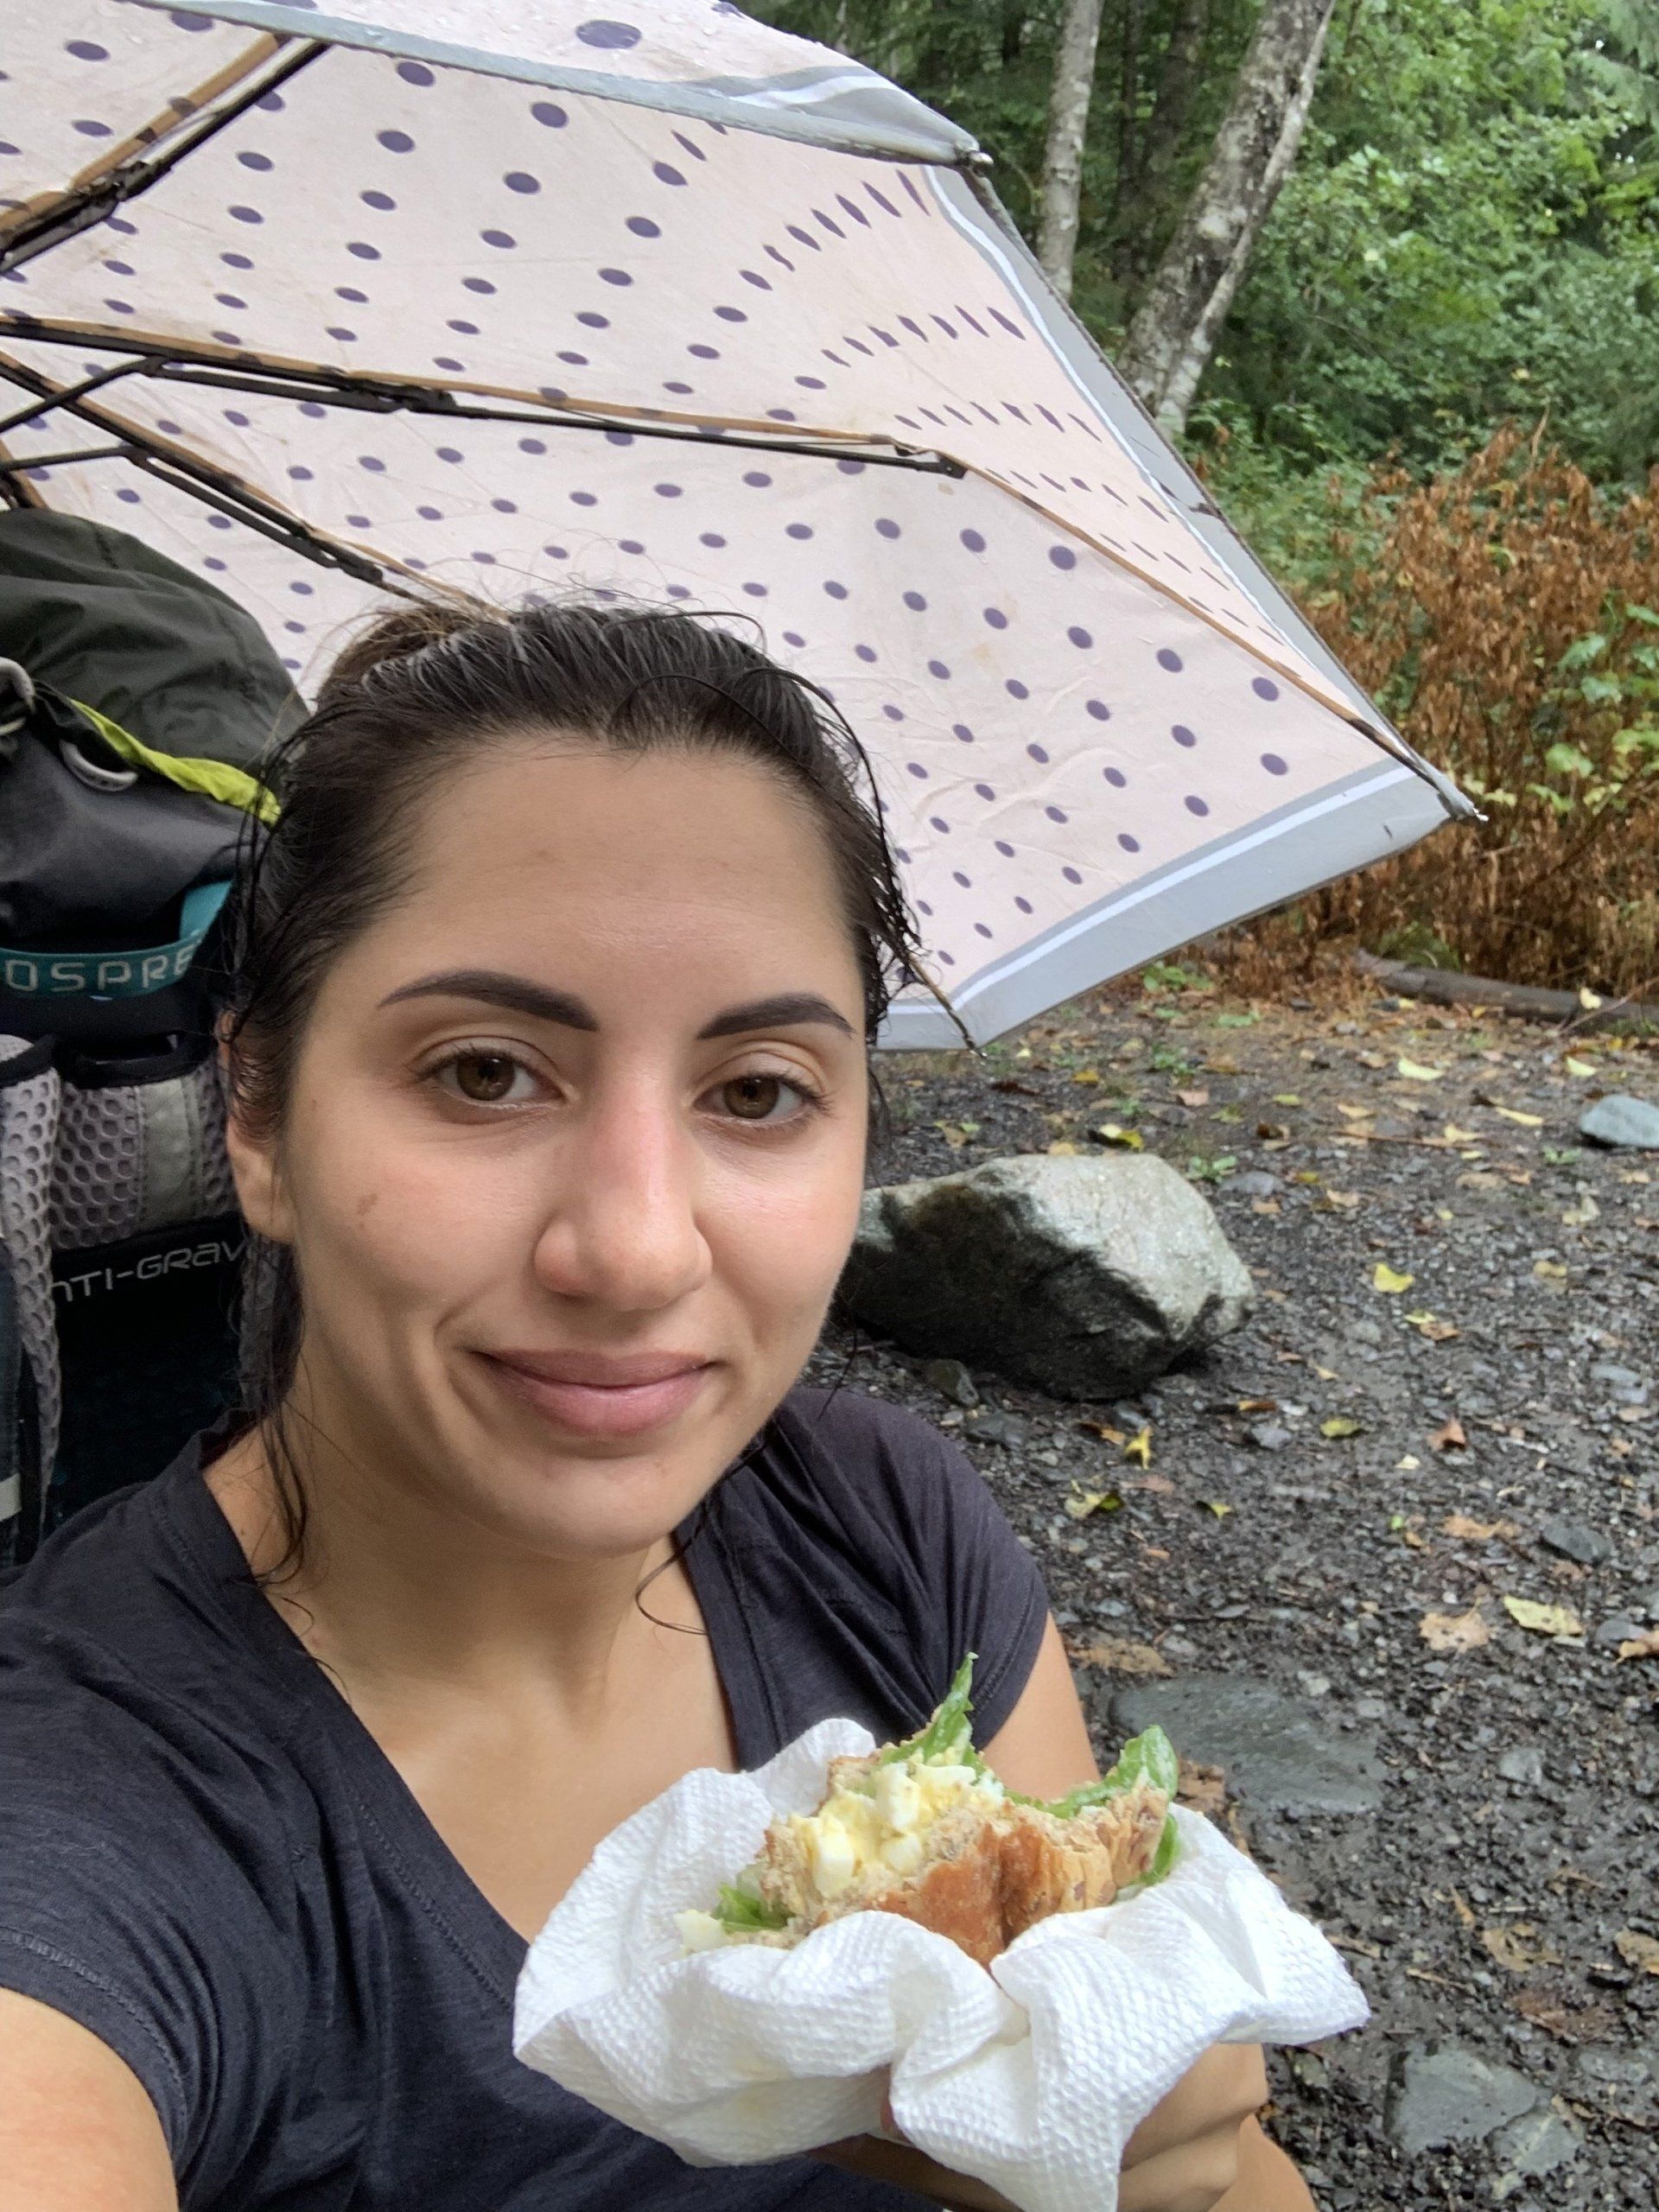 Lunch at Golden Ears park, BC, Canada